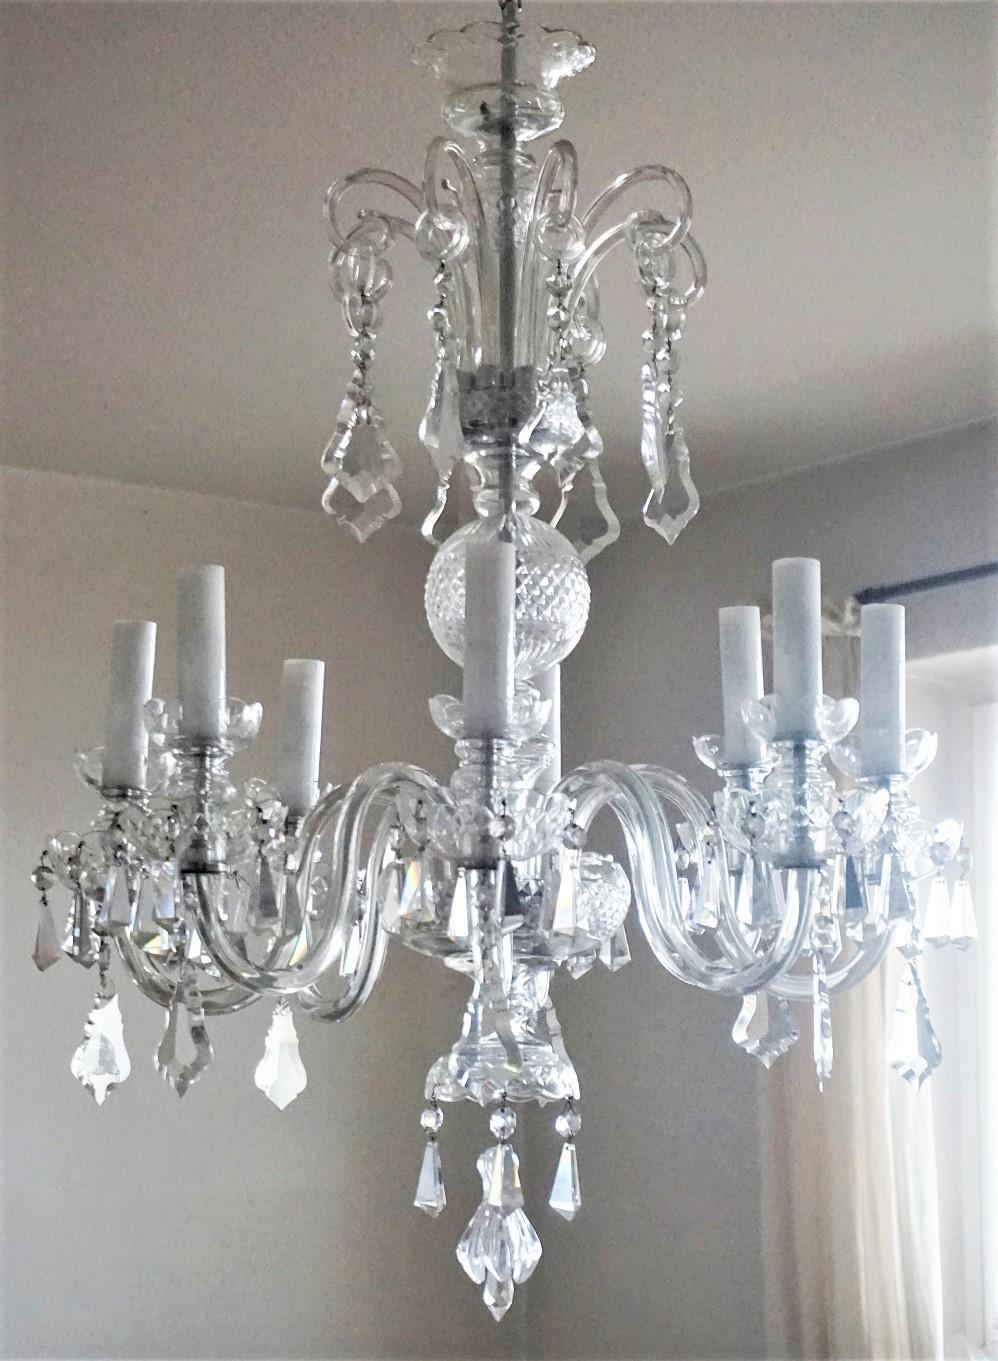 Large Original Venetian Handcrafted Murano Crystal Chandelier, Italy, 1910-1920 For Sale 1